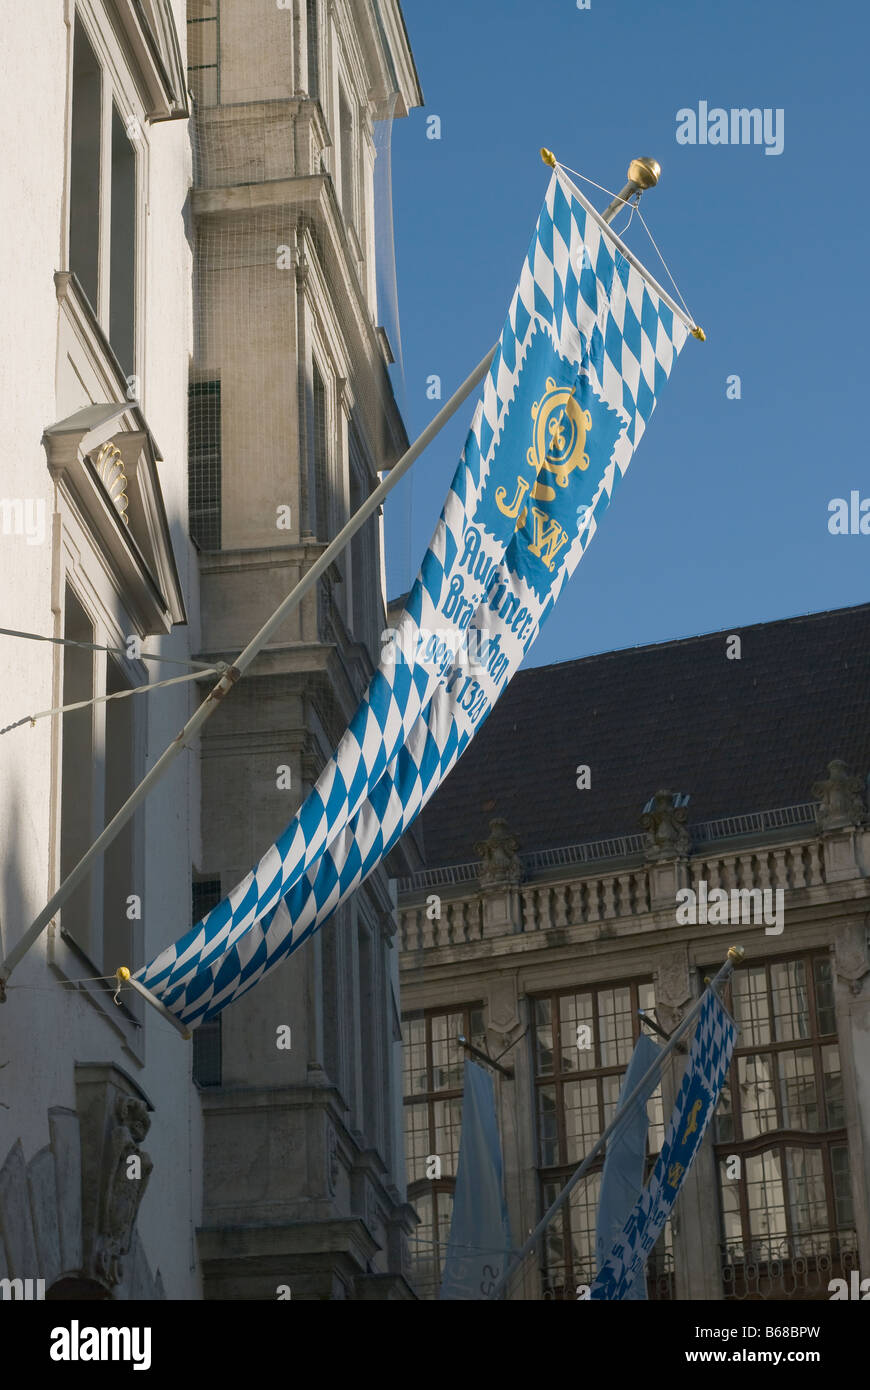 Munich Germany 2008 Augustiner Braeu Brewery Flag on the Orlando House located in the old part of Munich Stock Photo